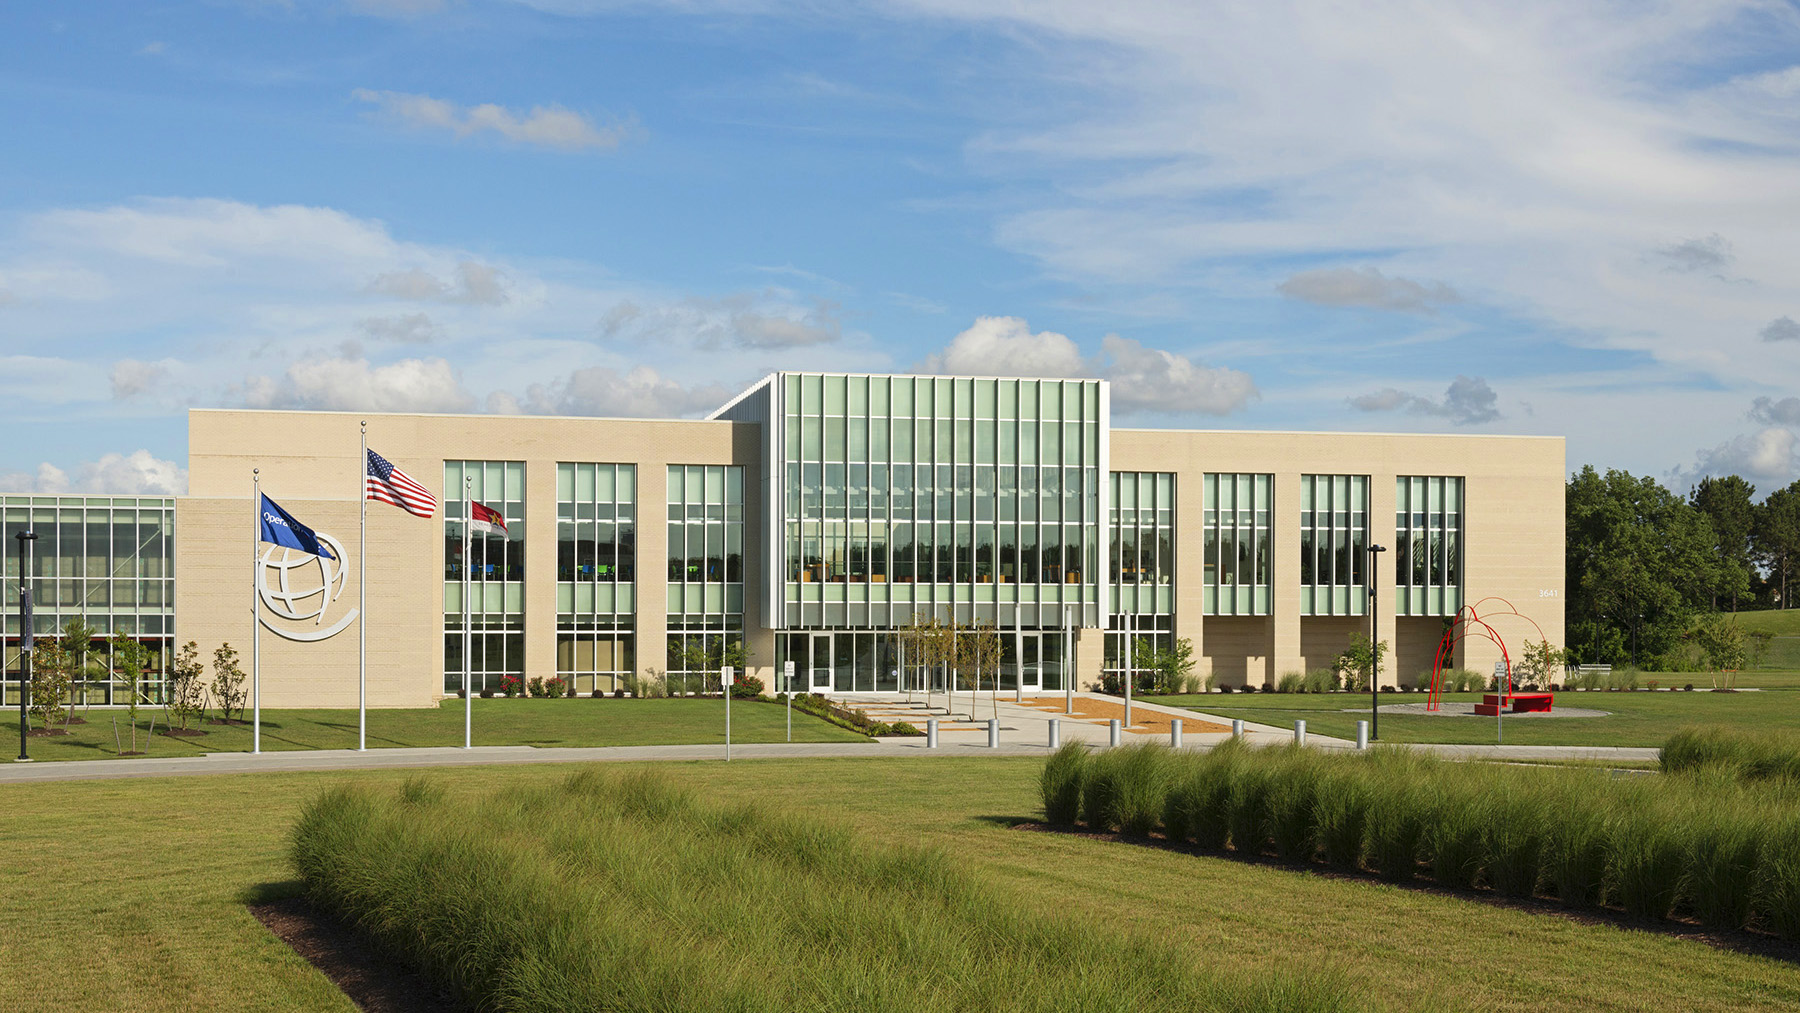 Operation Smile Headquarters earn LEED Gold certification